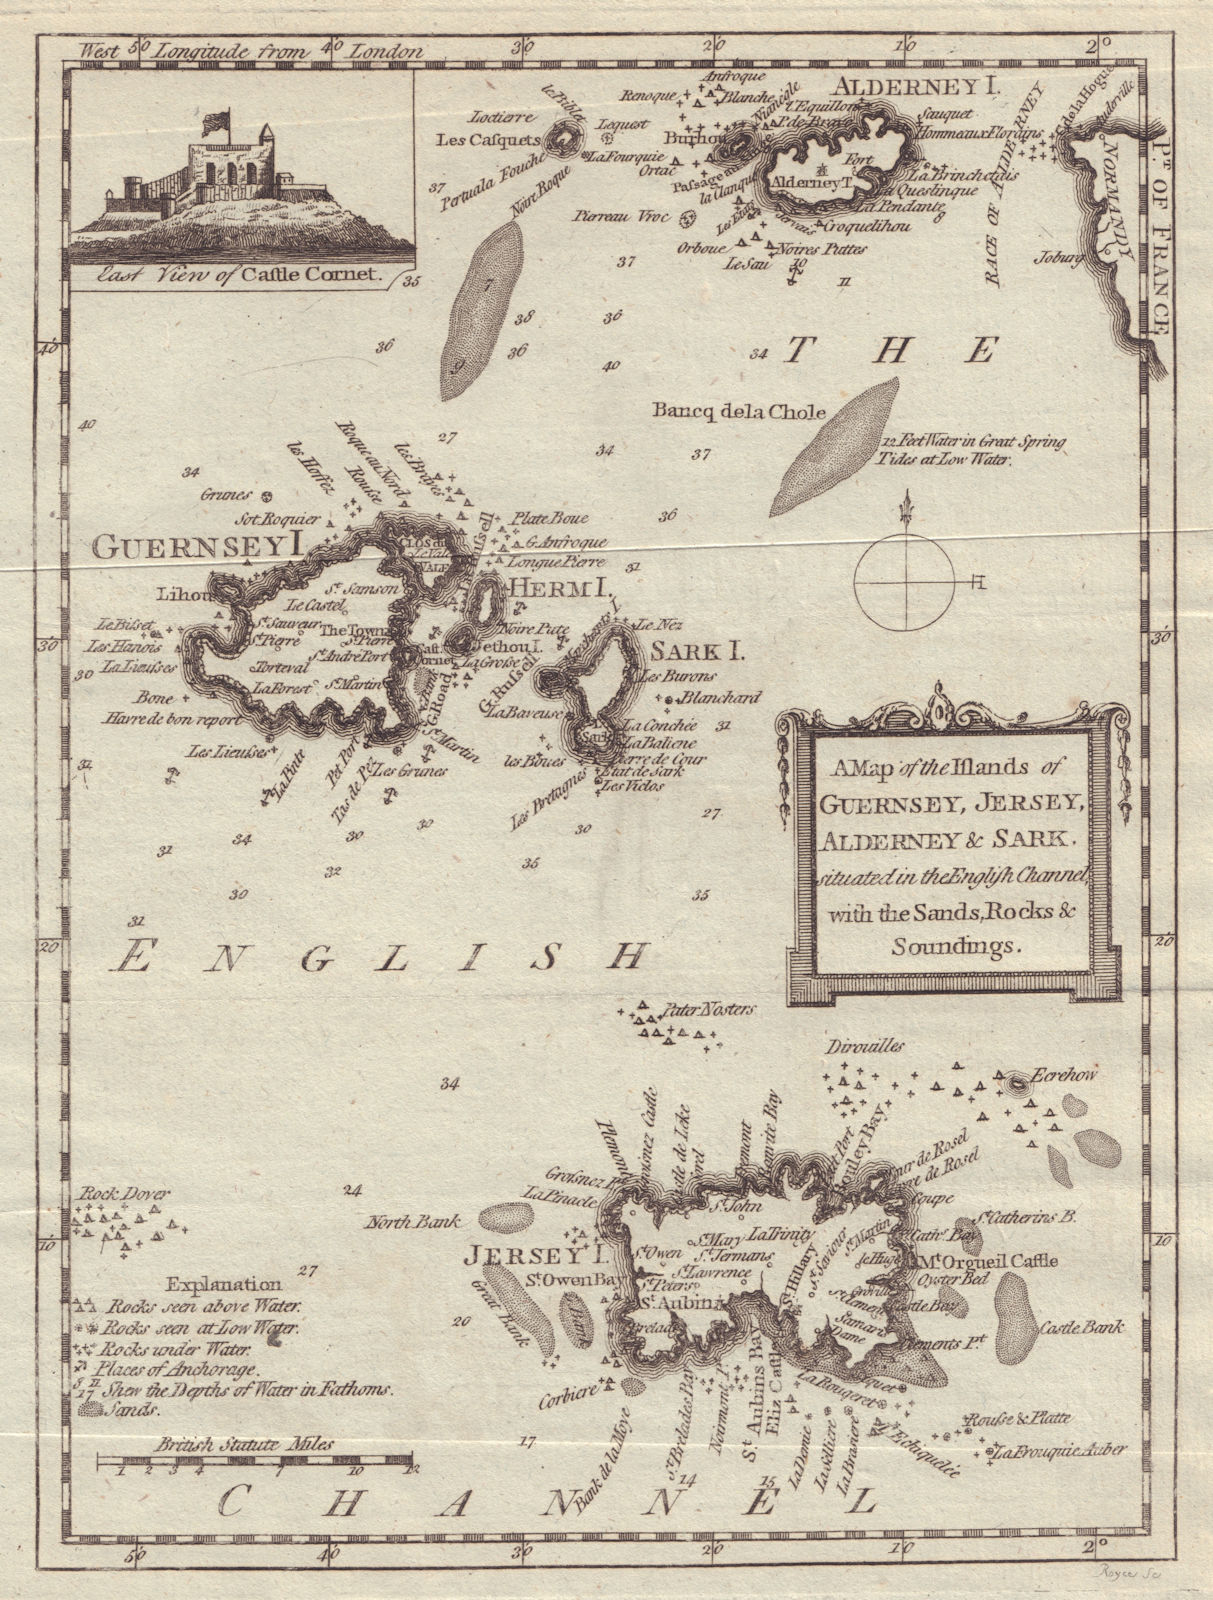 The [Channel] Islands of Guernsey, Jersey, Alderney & Sark… GENTS MAG 1779 map